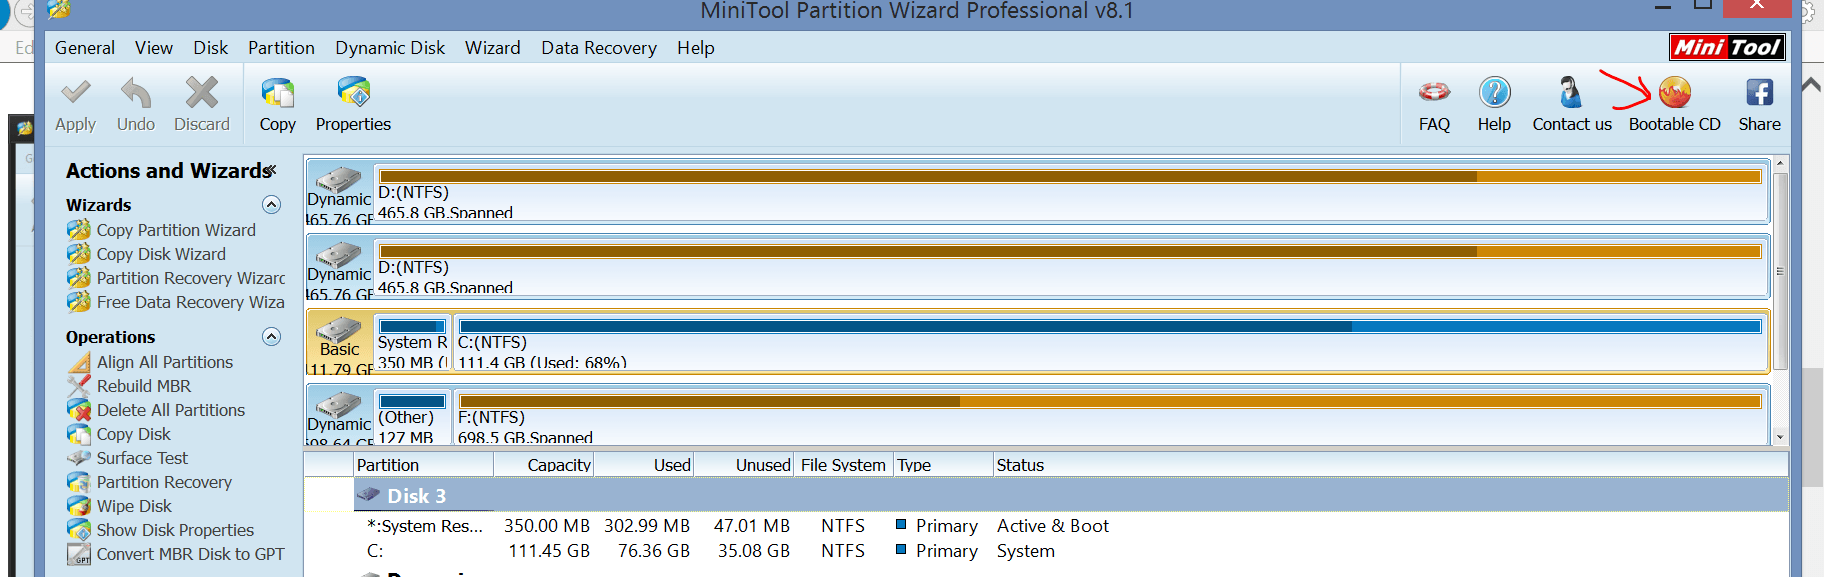 How to Choose a Right Desktop SSD and Install It in Desktop PC - MiniTool  Partition Wizard